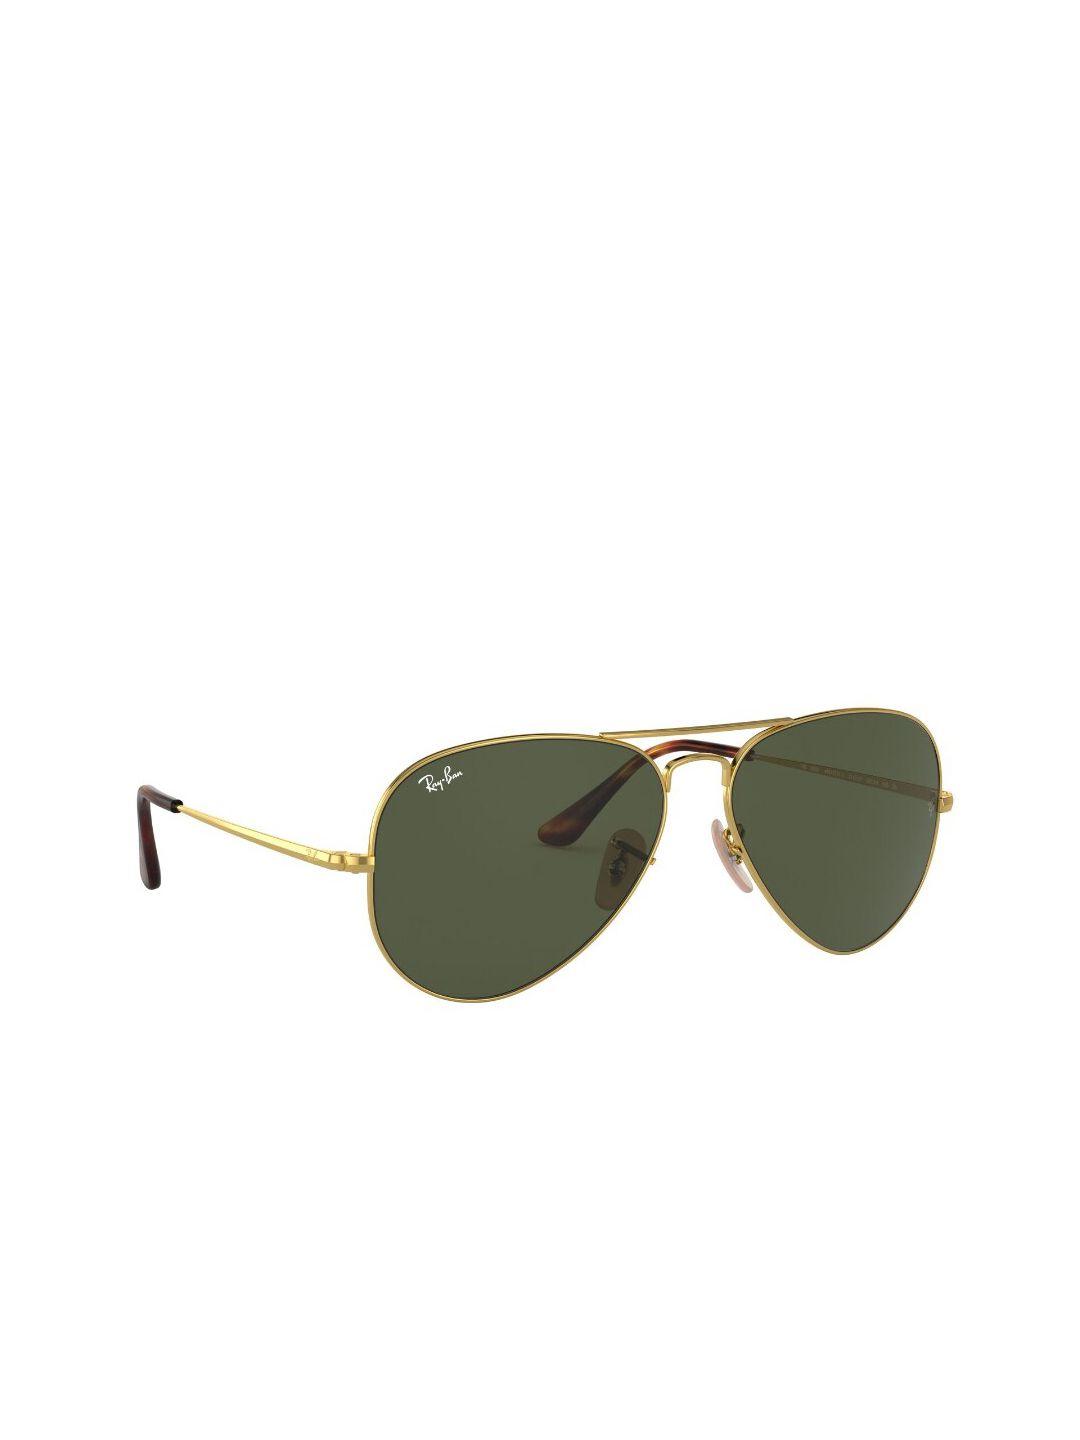 ray-ban aviator sunglasses with uv protected lens 8056597148504